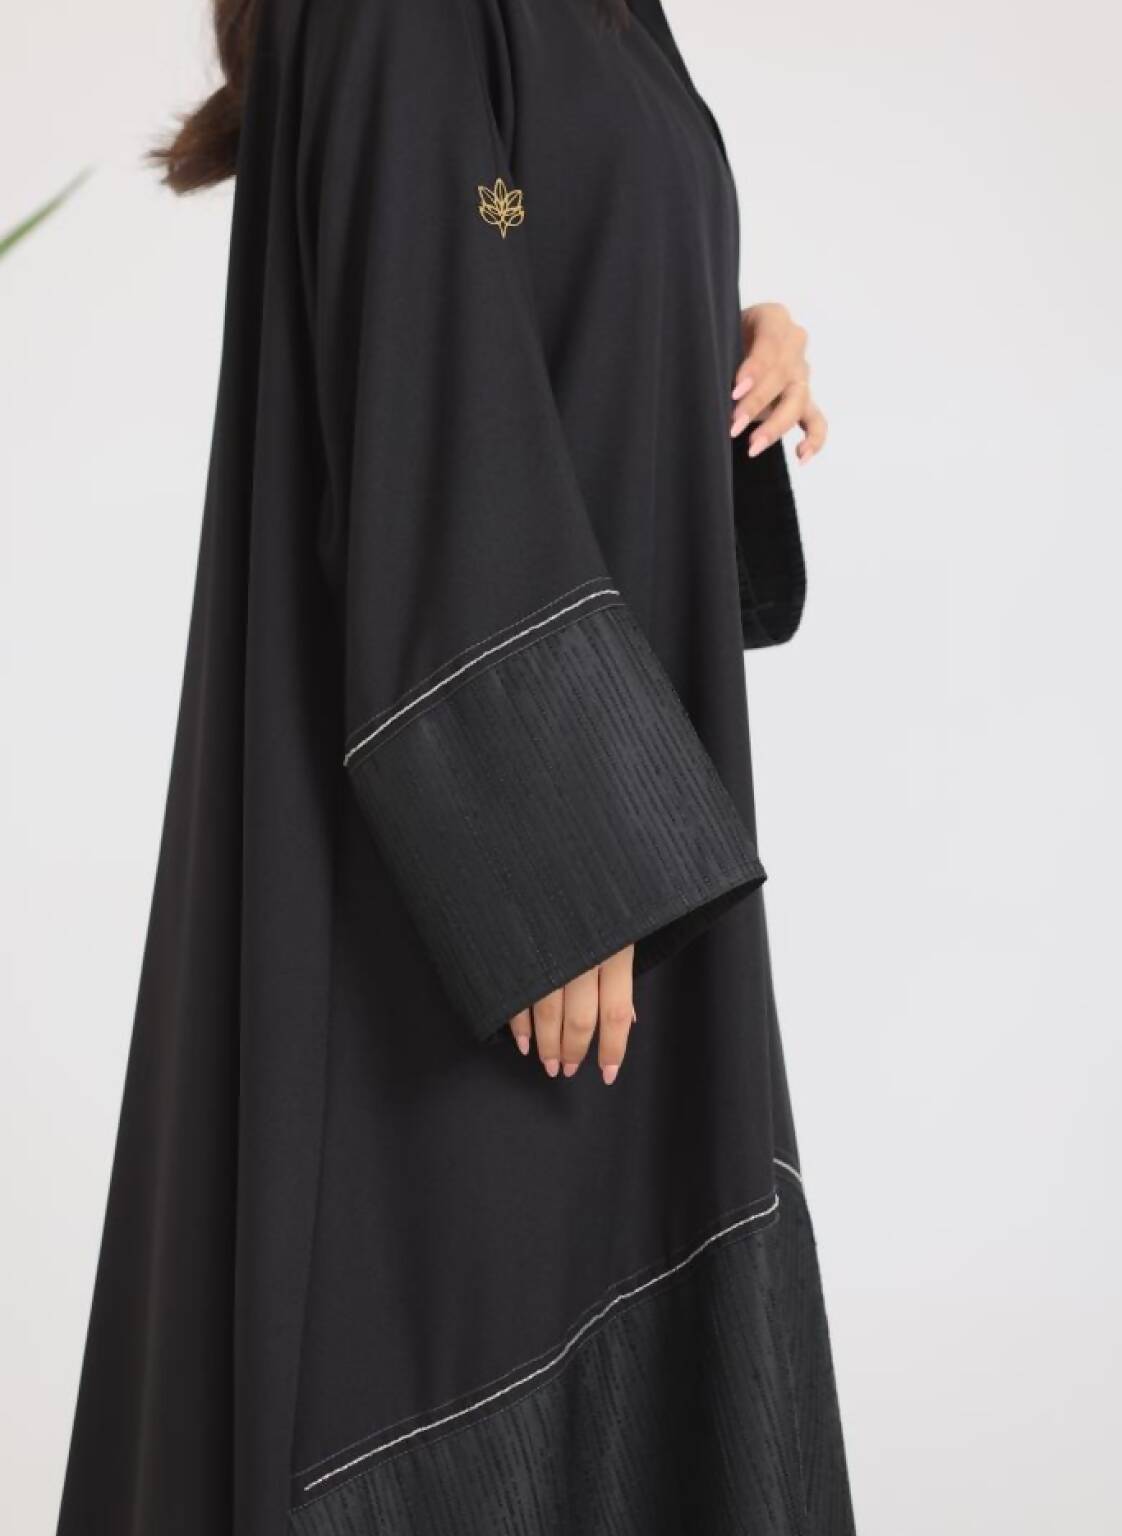 Casual Abaya with Light Beads Embroidery